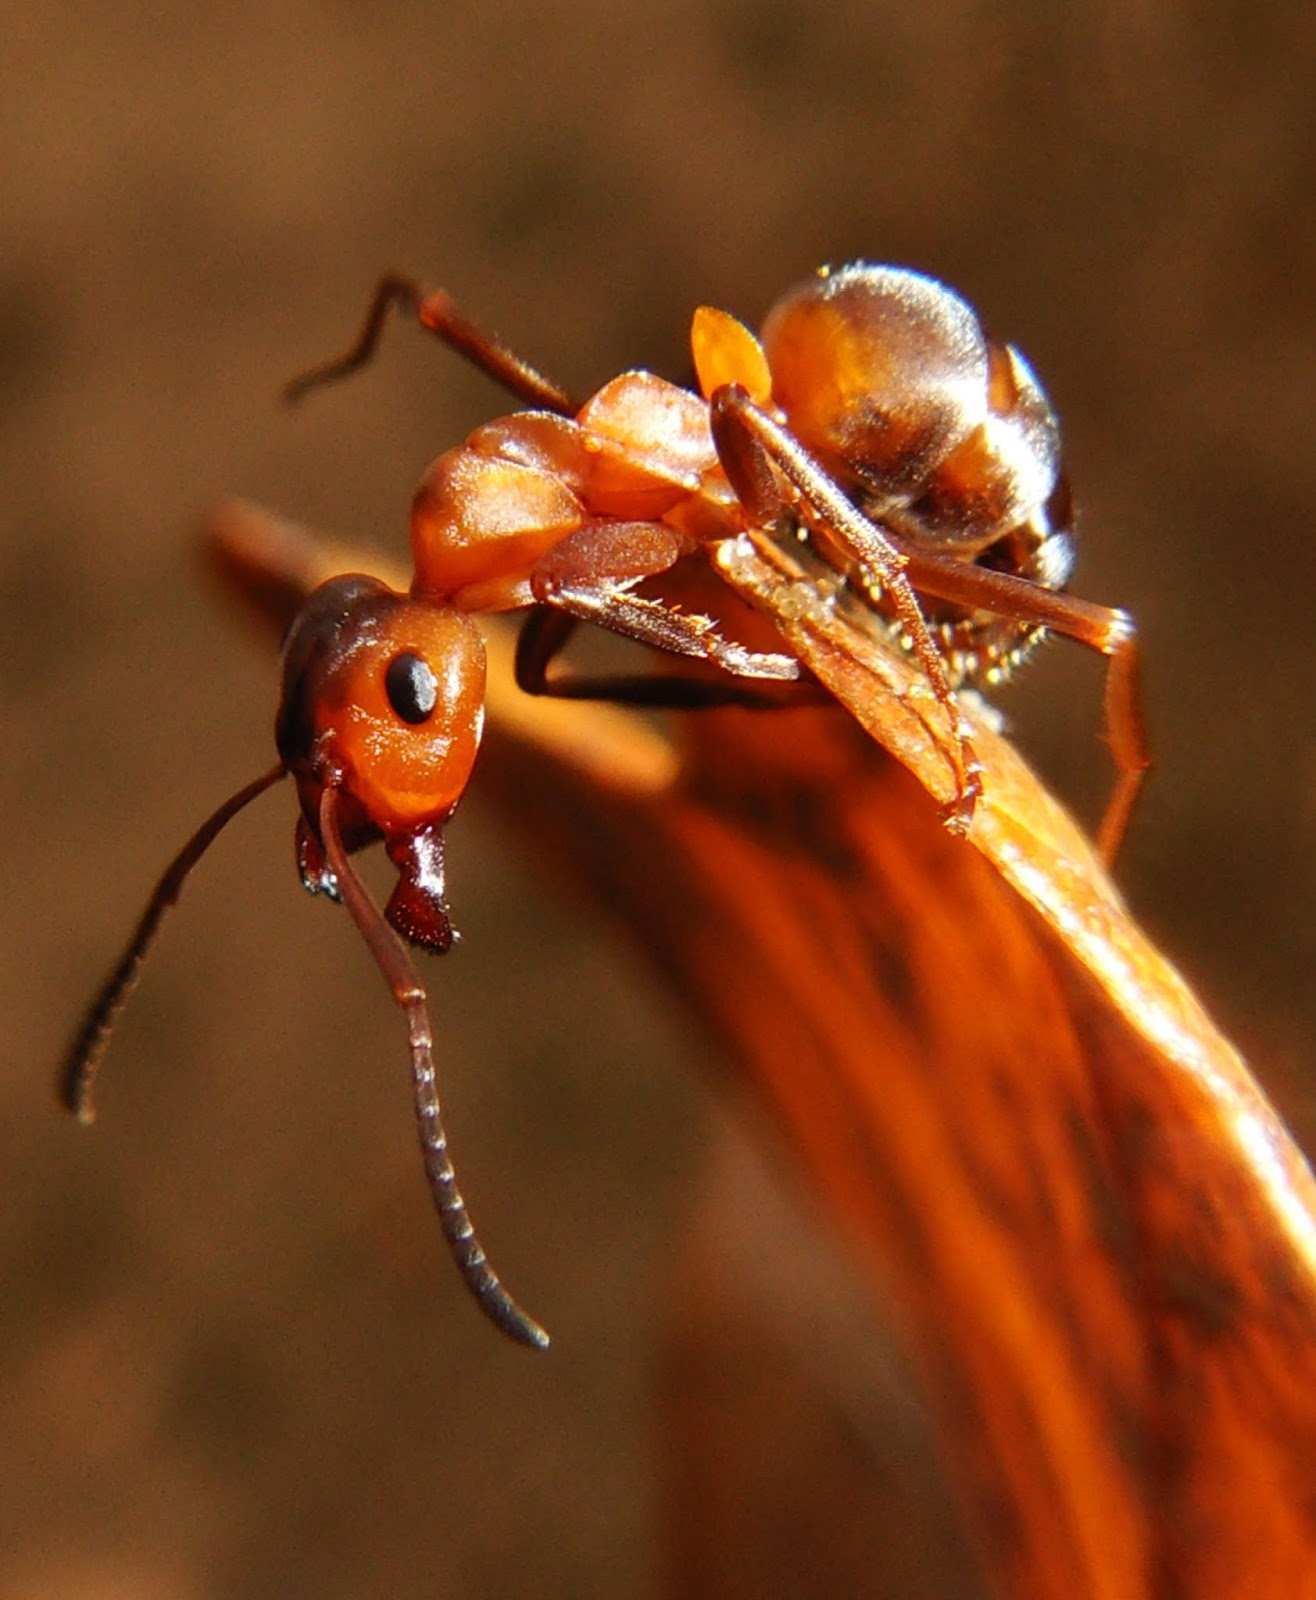 Picture of an ant up close.